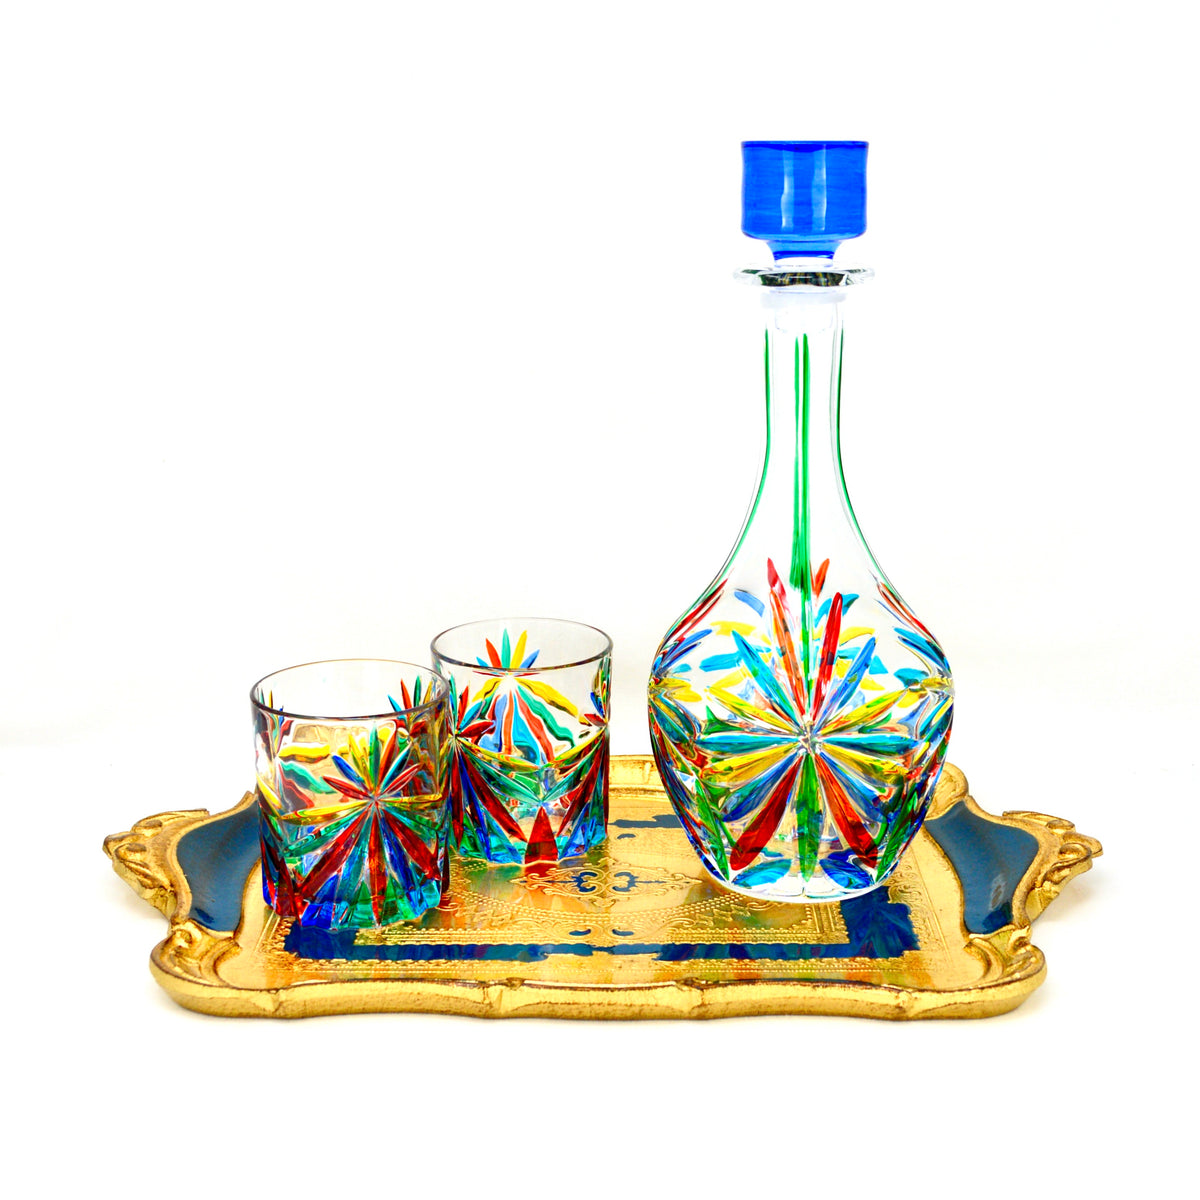 Starburst Round Decanter, Hand Painted Crystal, Made in Italy - My Italian Decor